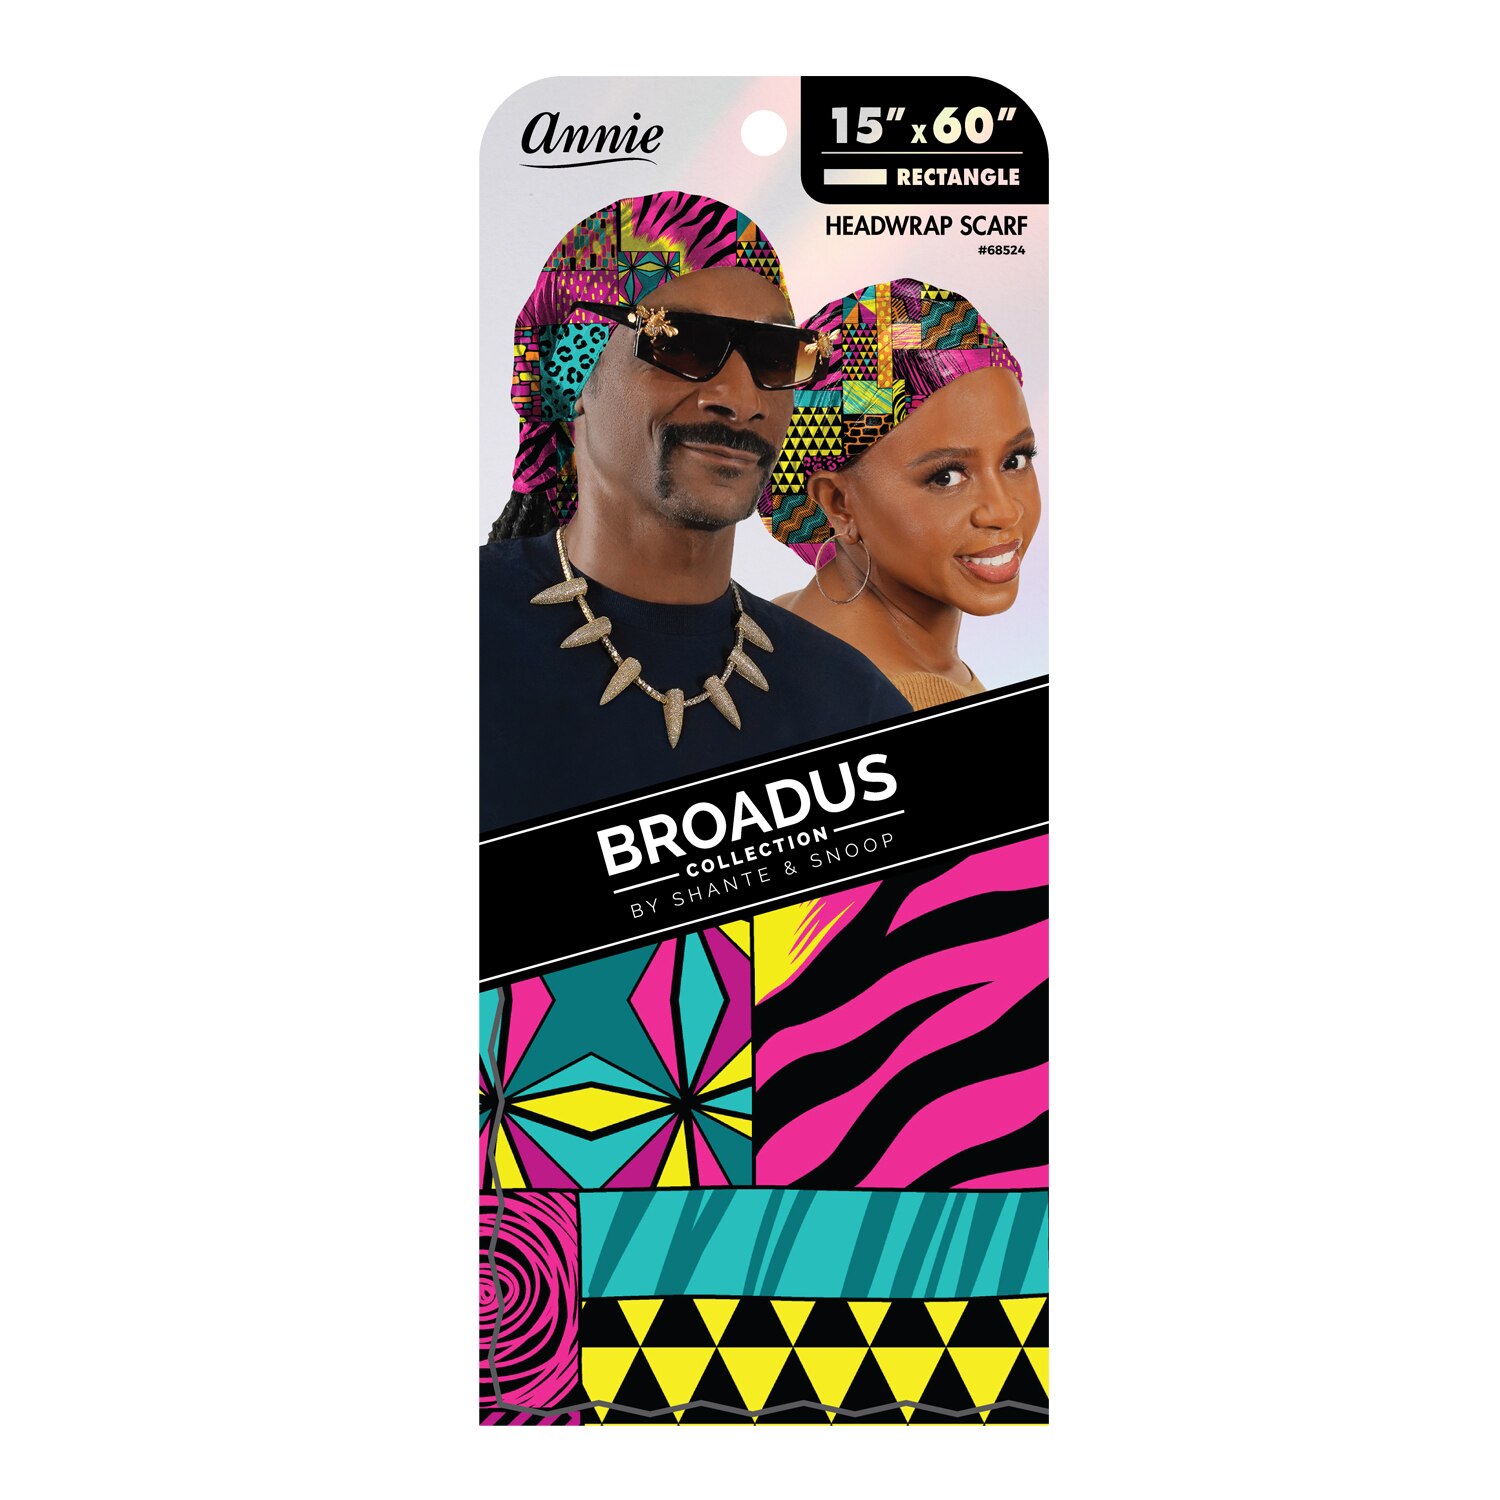 Annie Broadus Collection Headwrap Scarf, Question, 60 In. X 15 In. , CVS